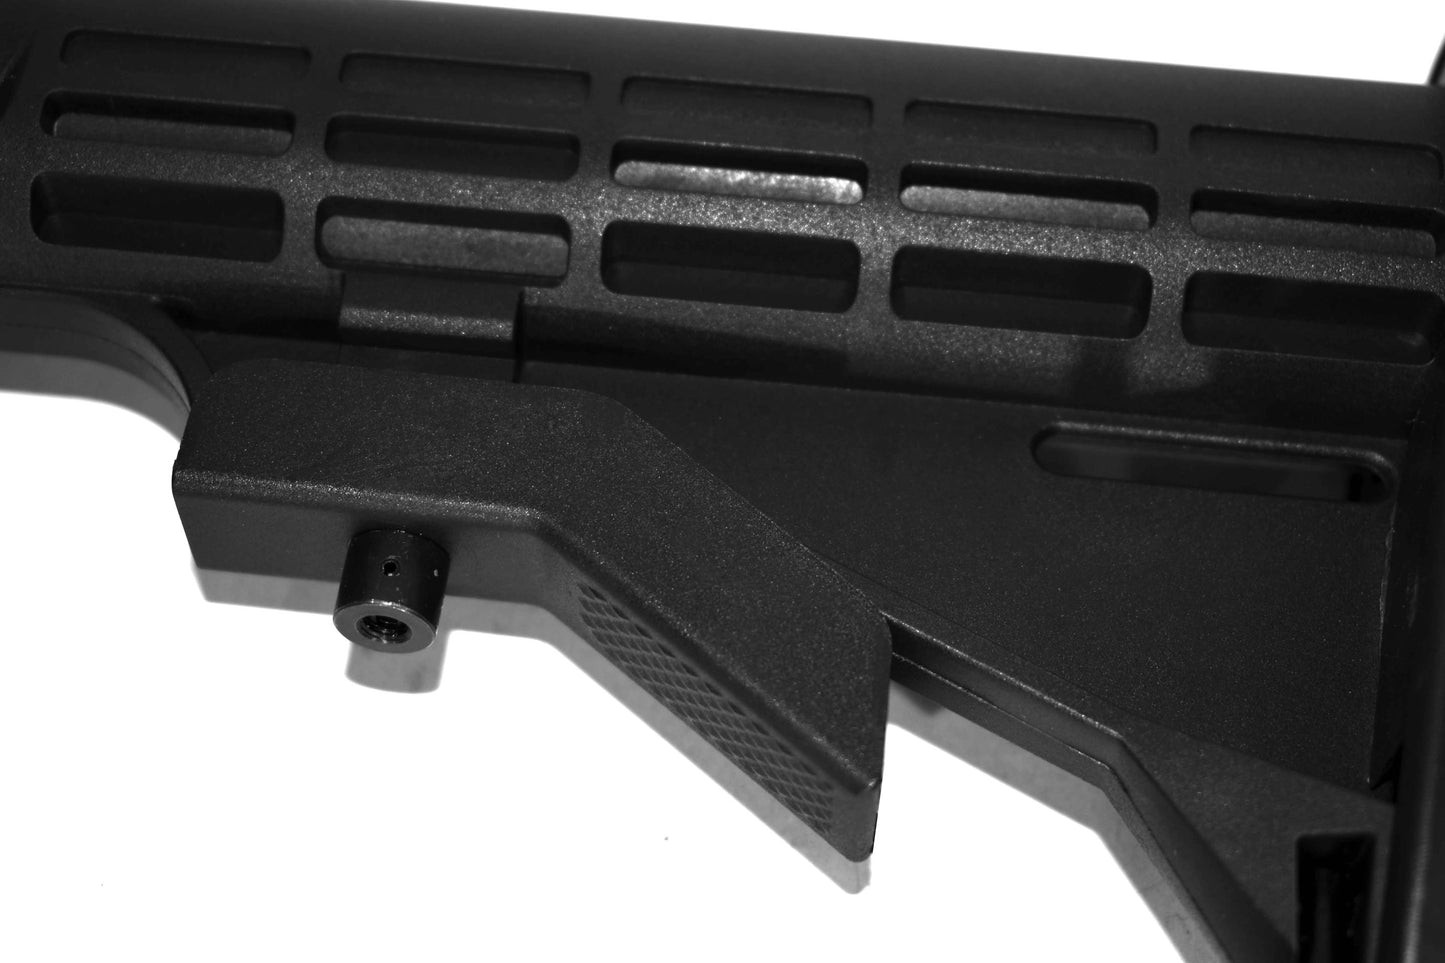 Tactical Adjustable Stock With Butt Pad Compatible With mil-spec threaded Mossberg 500 and Remington 870 pistol grips.